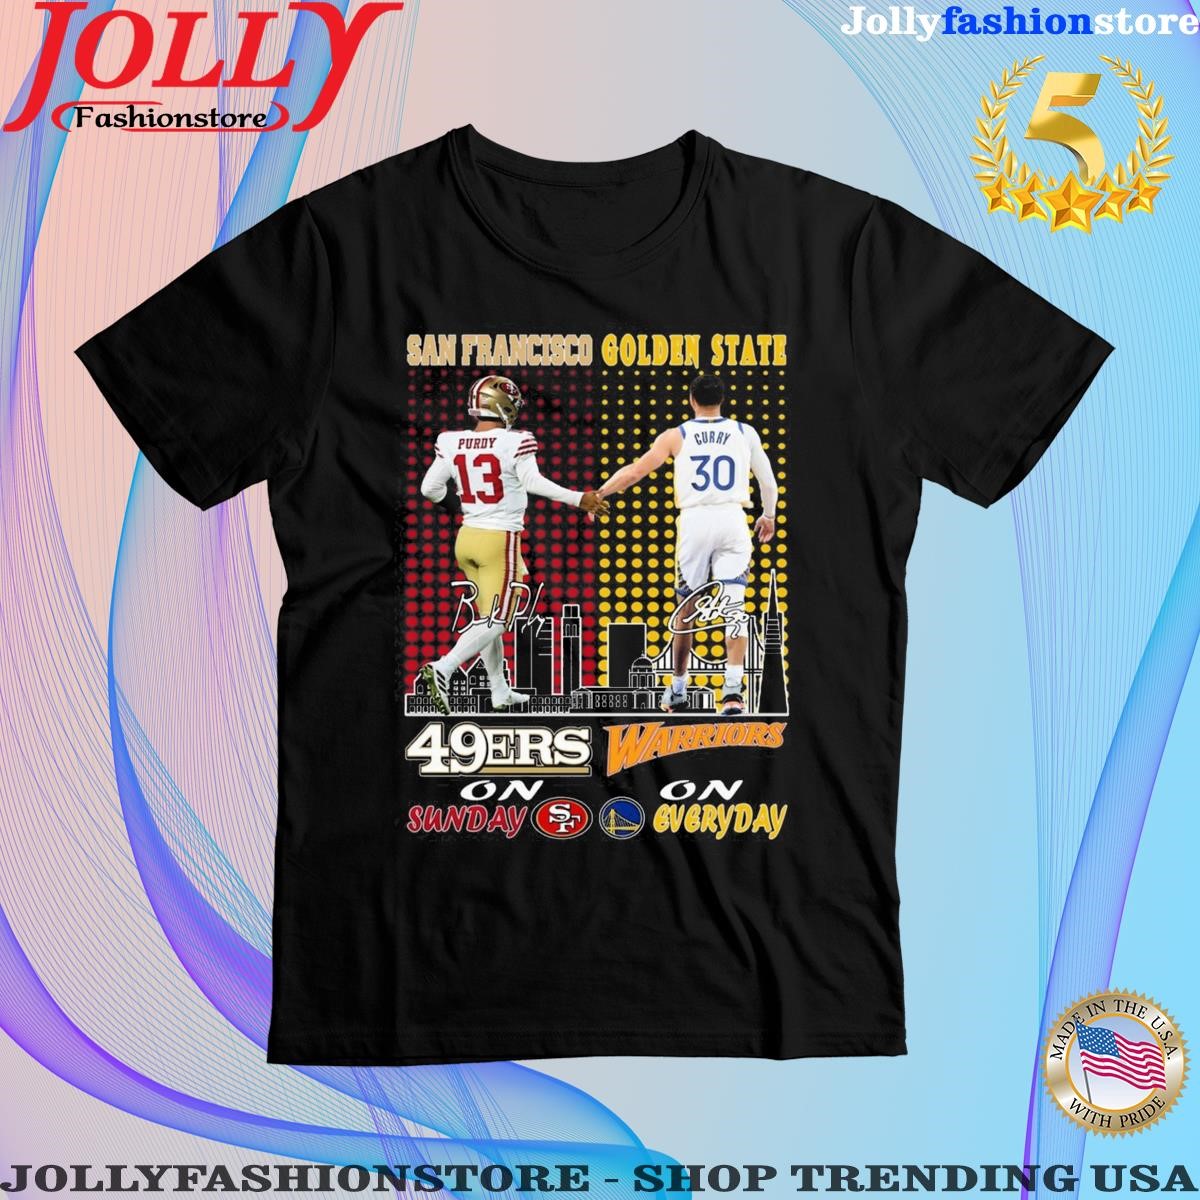 San francisco 49ers on sunday and golden state warriors on everyday signatures Shirt